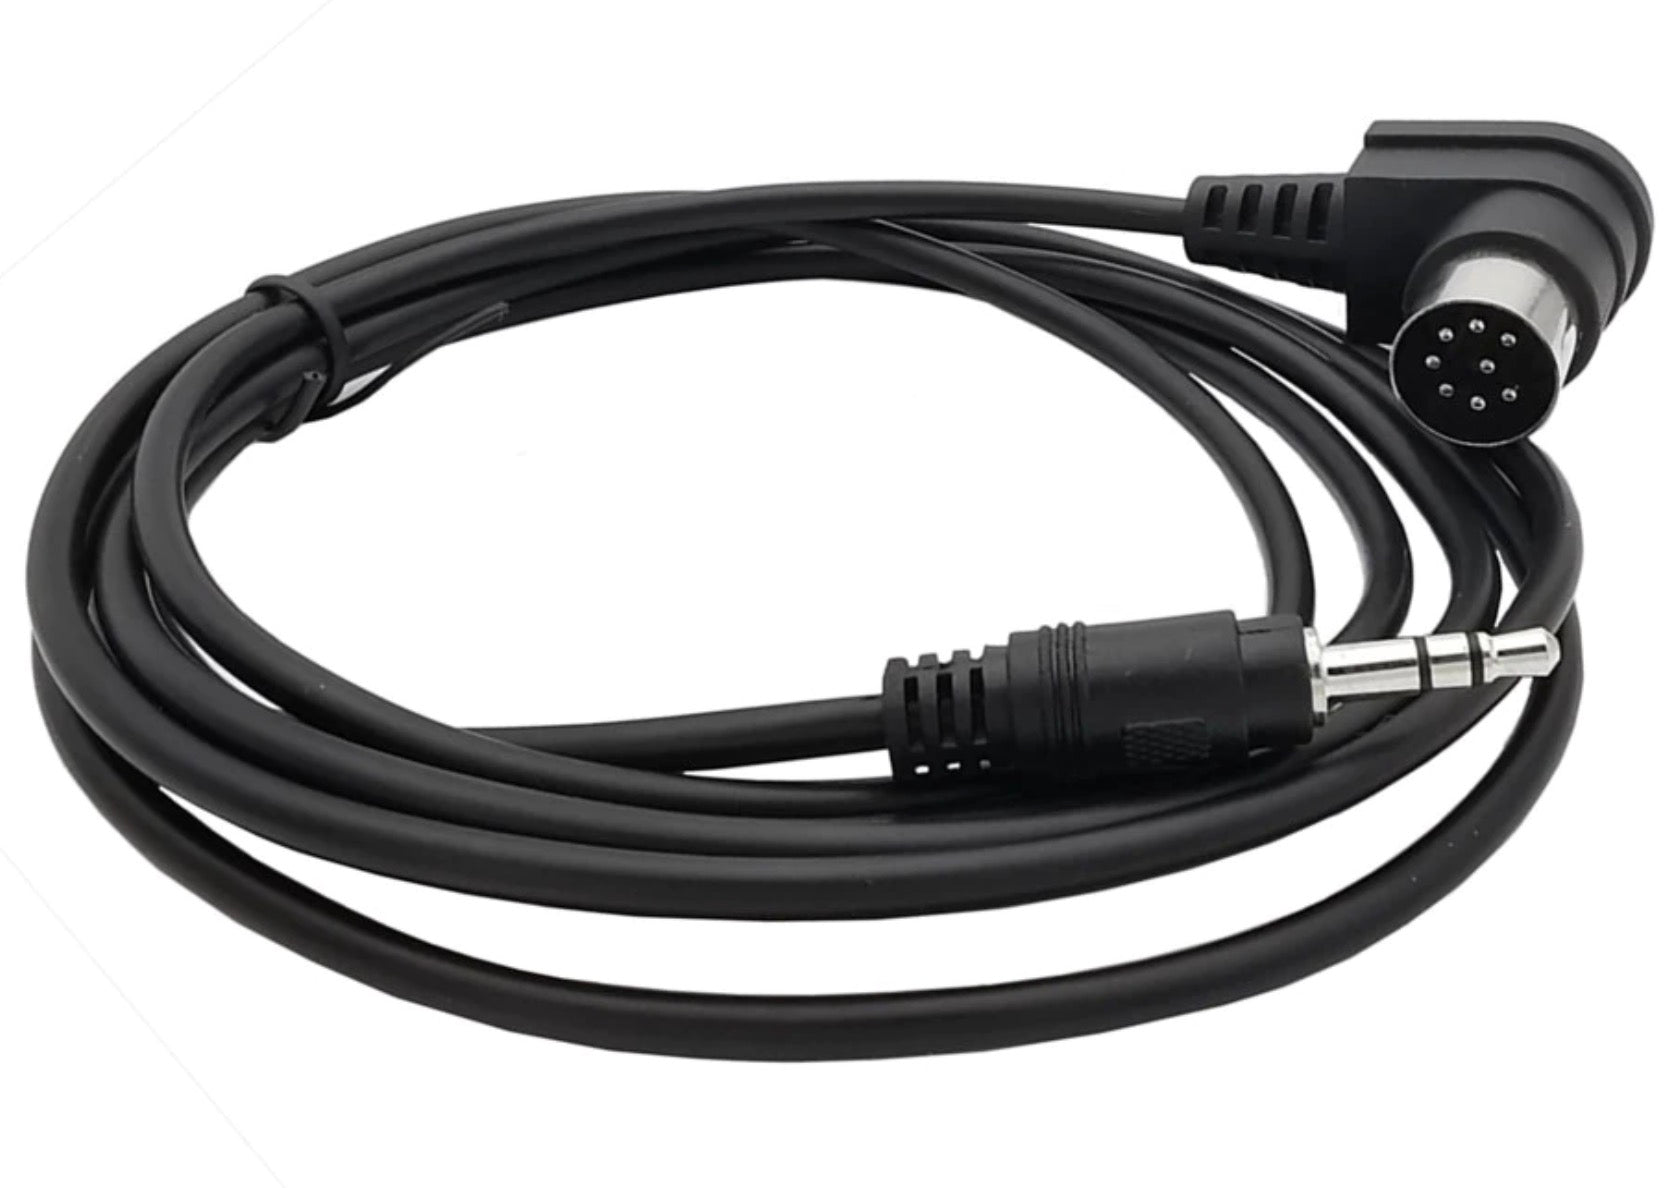 3.5mm Mini Jack AUX 8-Pin M-BUS Audio Input Adapter Cable 1.8m